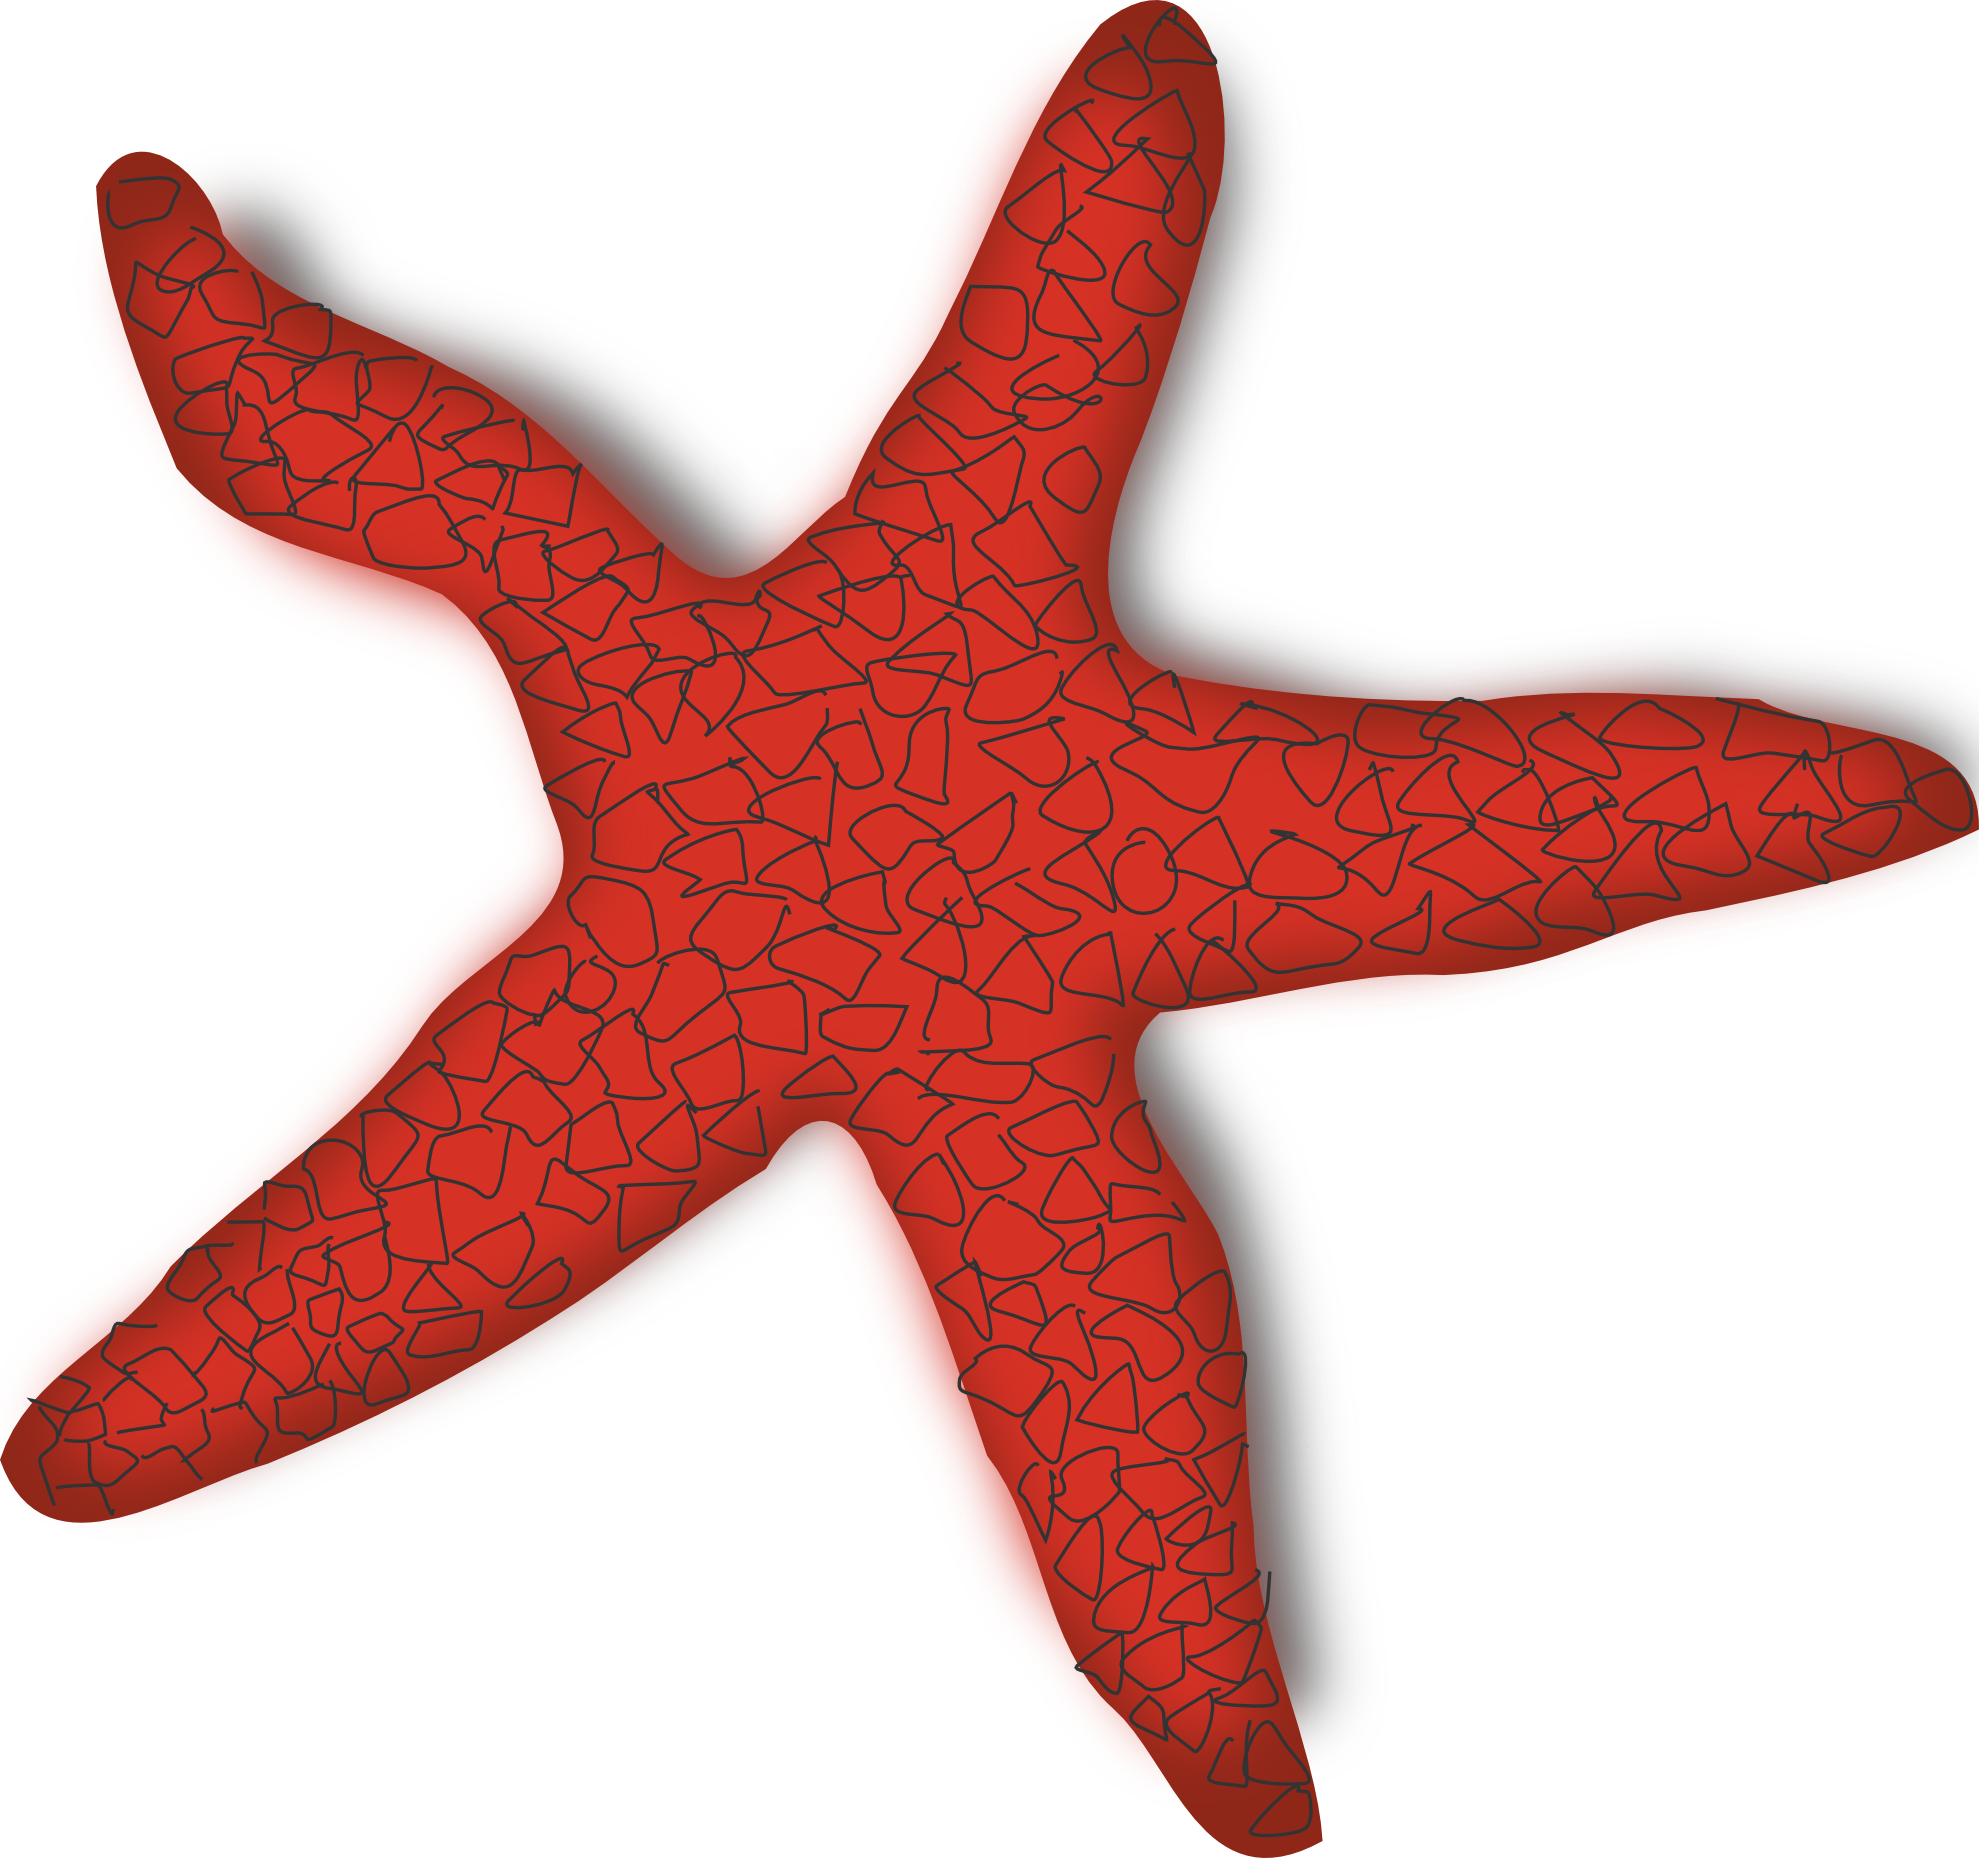 Starfish Clip Art Images | Clipart Panda - Free Clipart Images